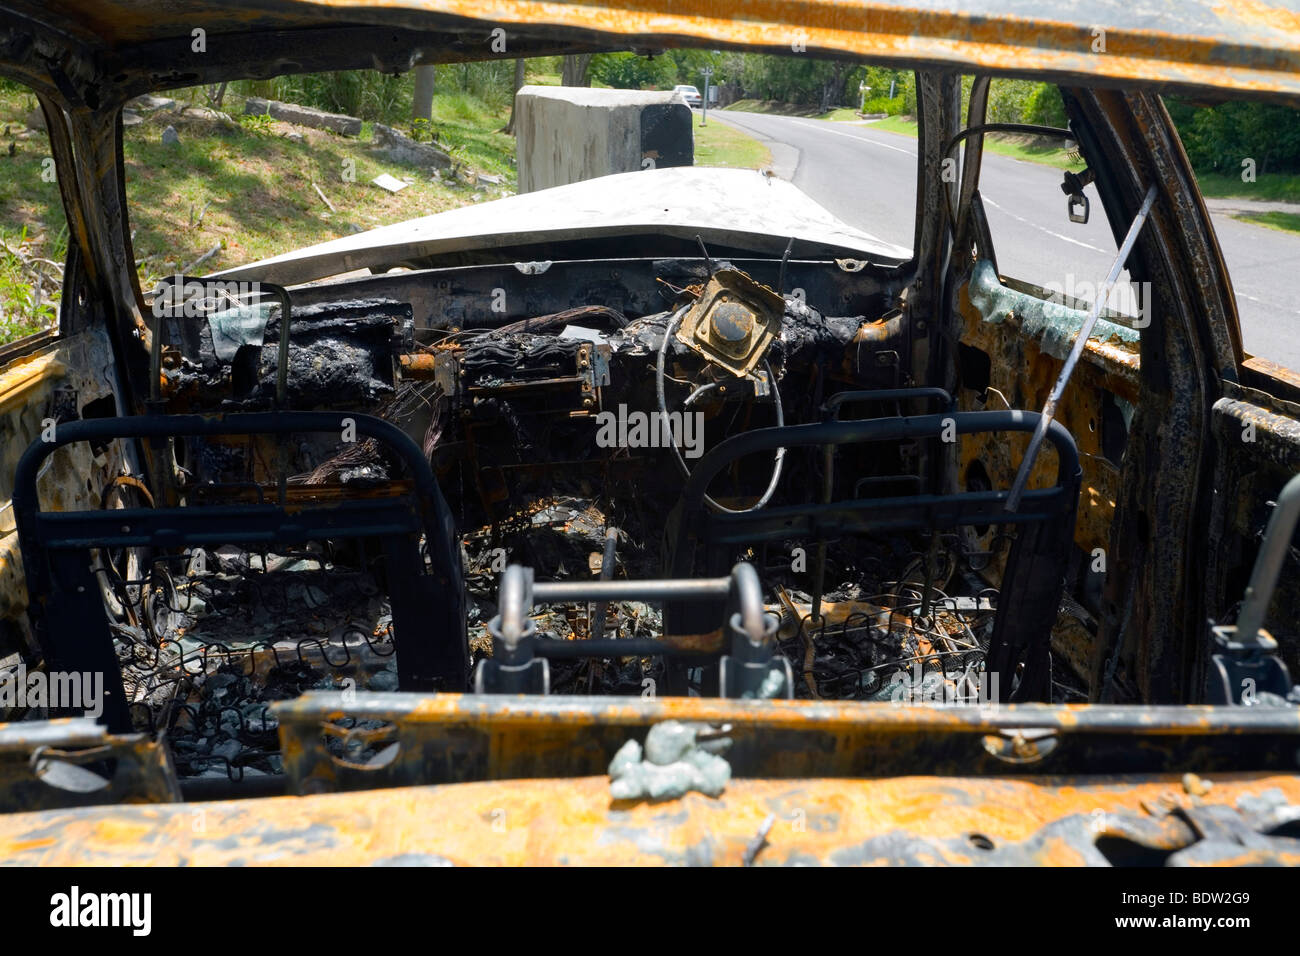 Remains of a car after crash and fire. Stock Photo